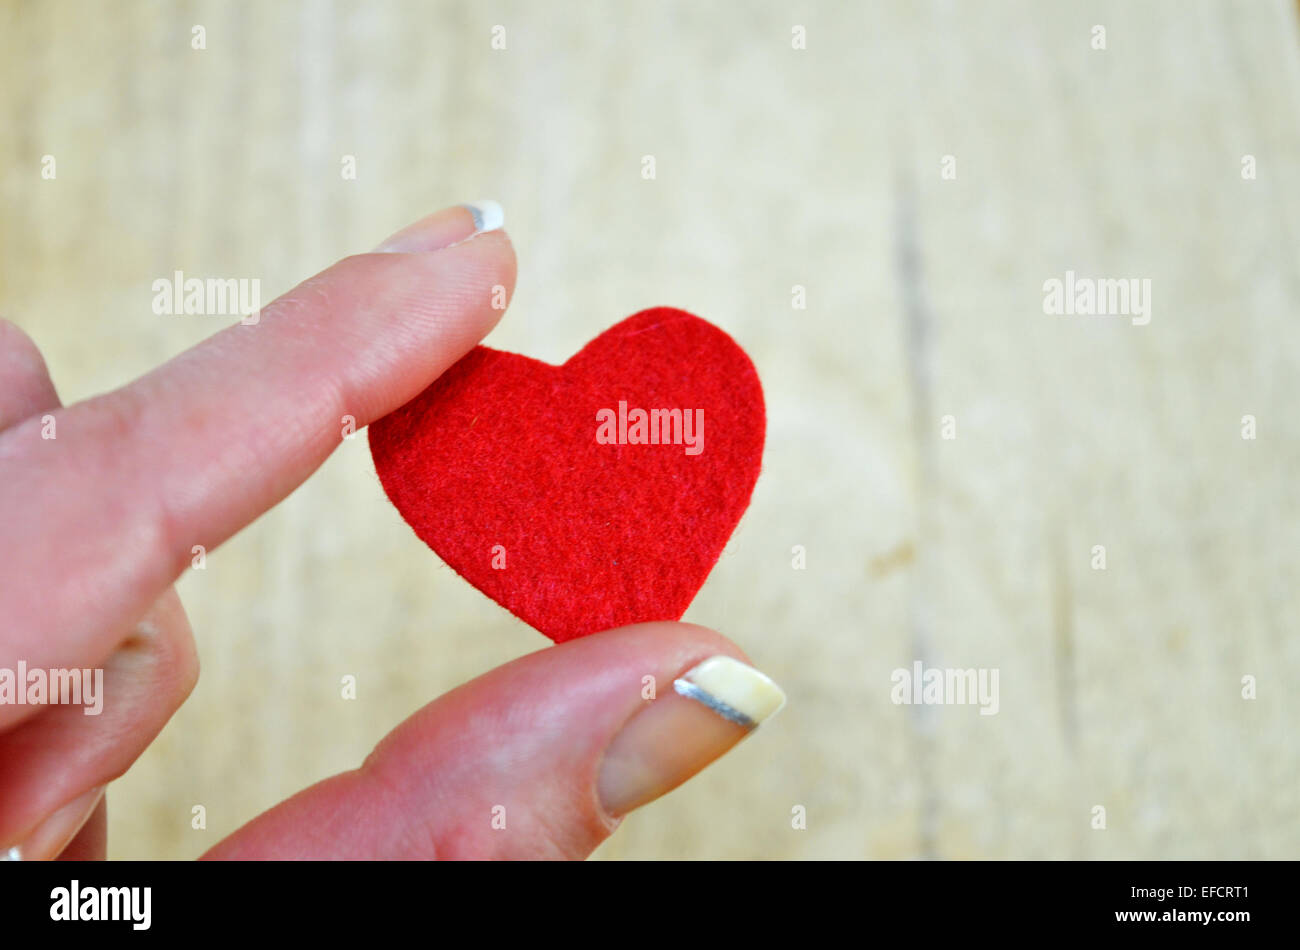 Tiny red heart held by women's fingers against a wooden background Stock Photo